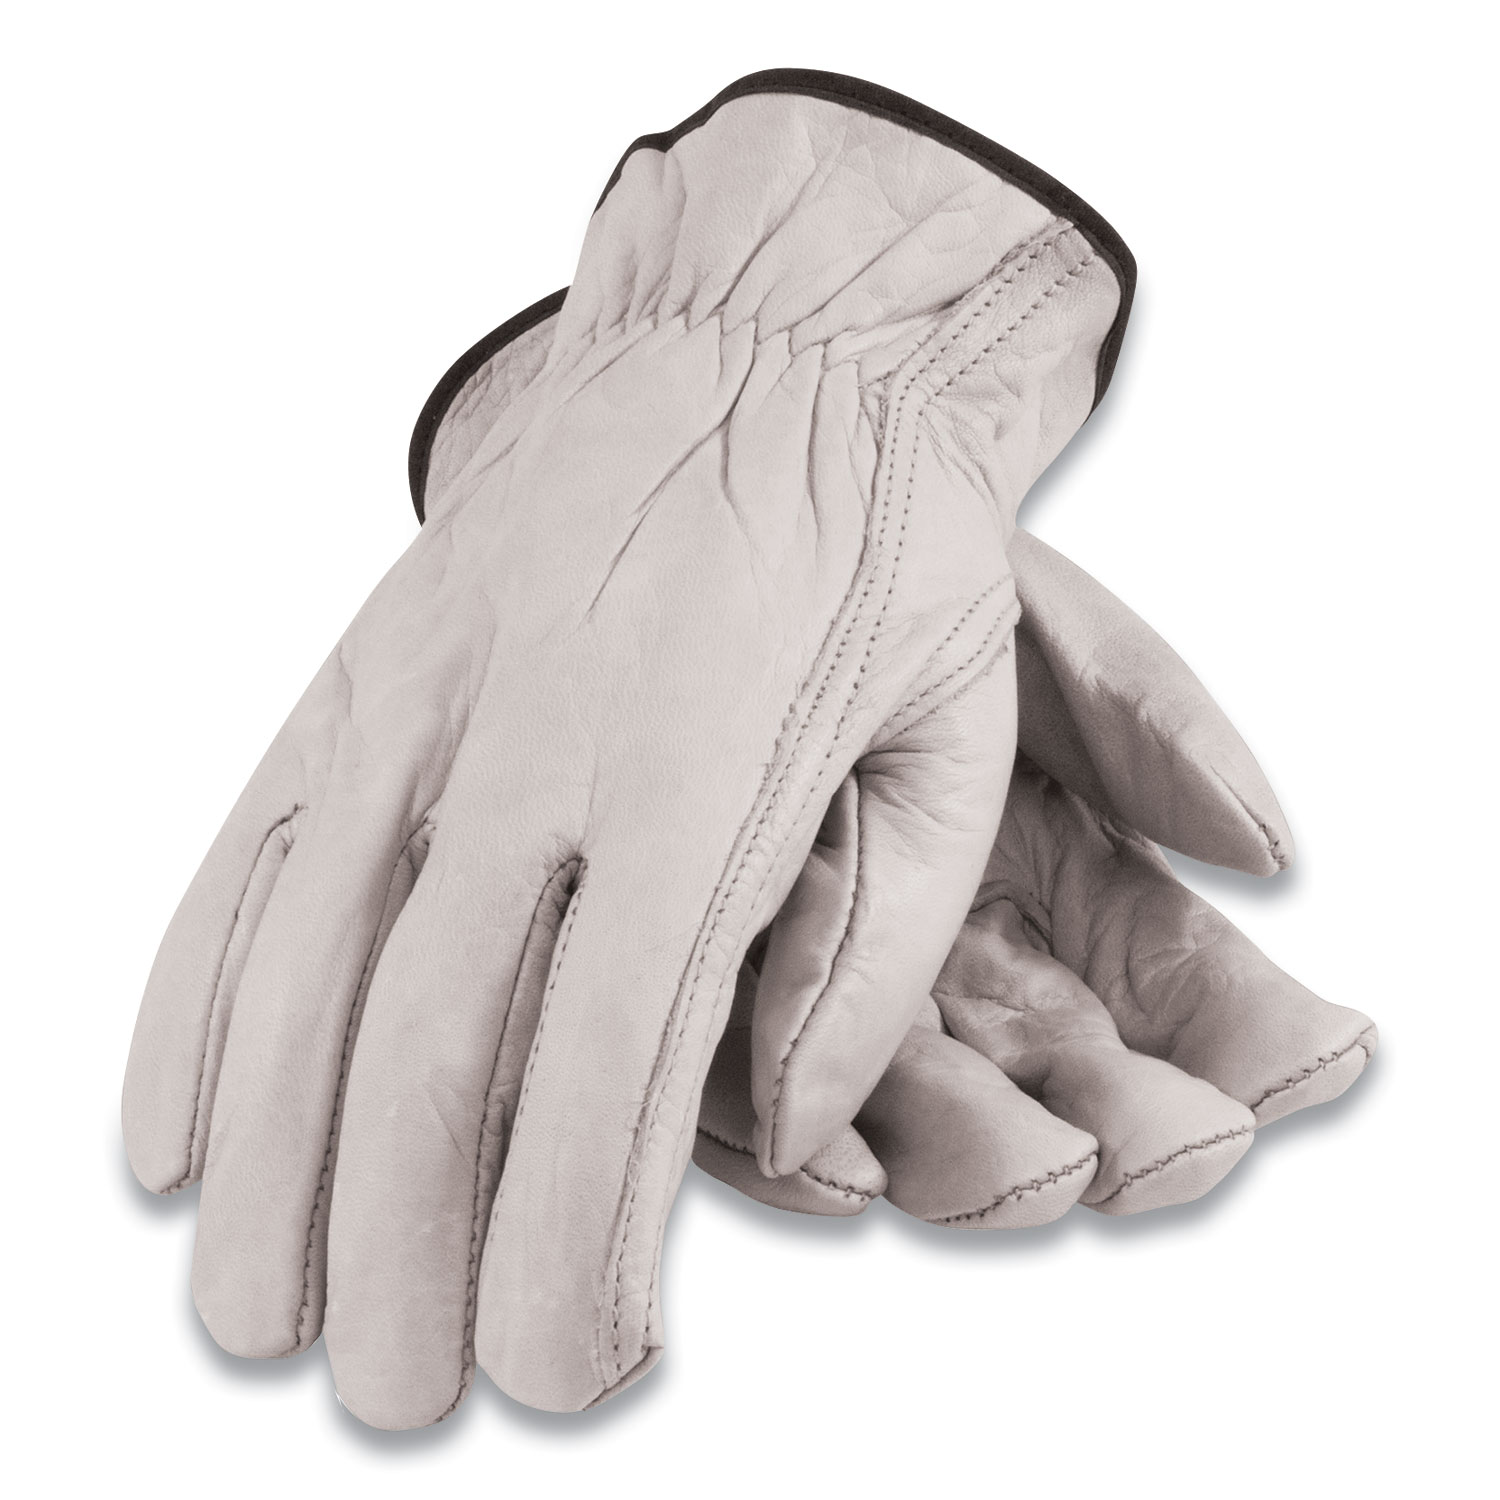  PIP 68-162/XL Top-Grain Cowhide Leather Work Gloves, Economy Grade, X-Large, Gray (PID179724) 